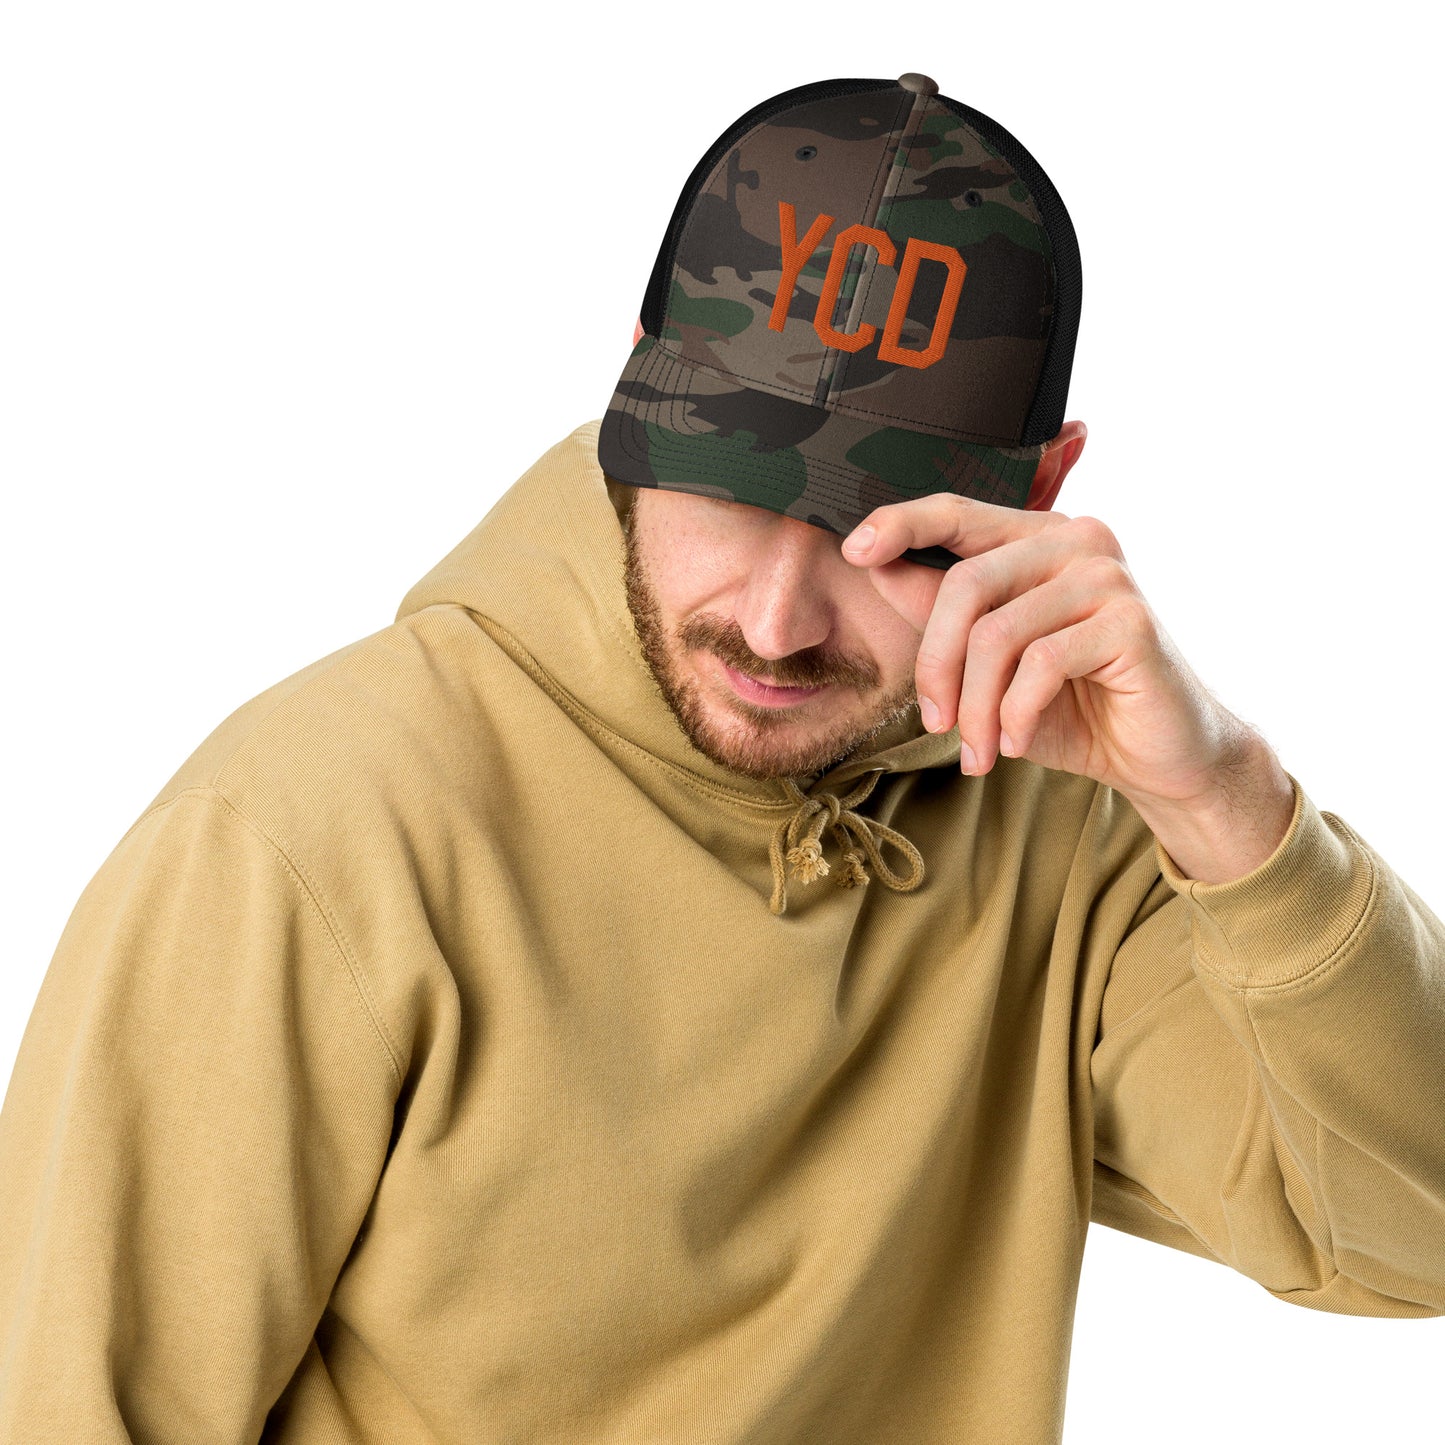 Airport Code Camouflage Trucker Hat - Orange • YCD Nanaimo • YHM Designs - Image 05